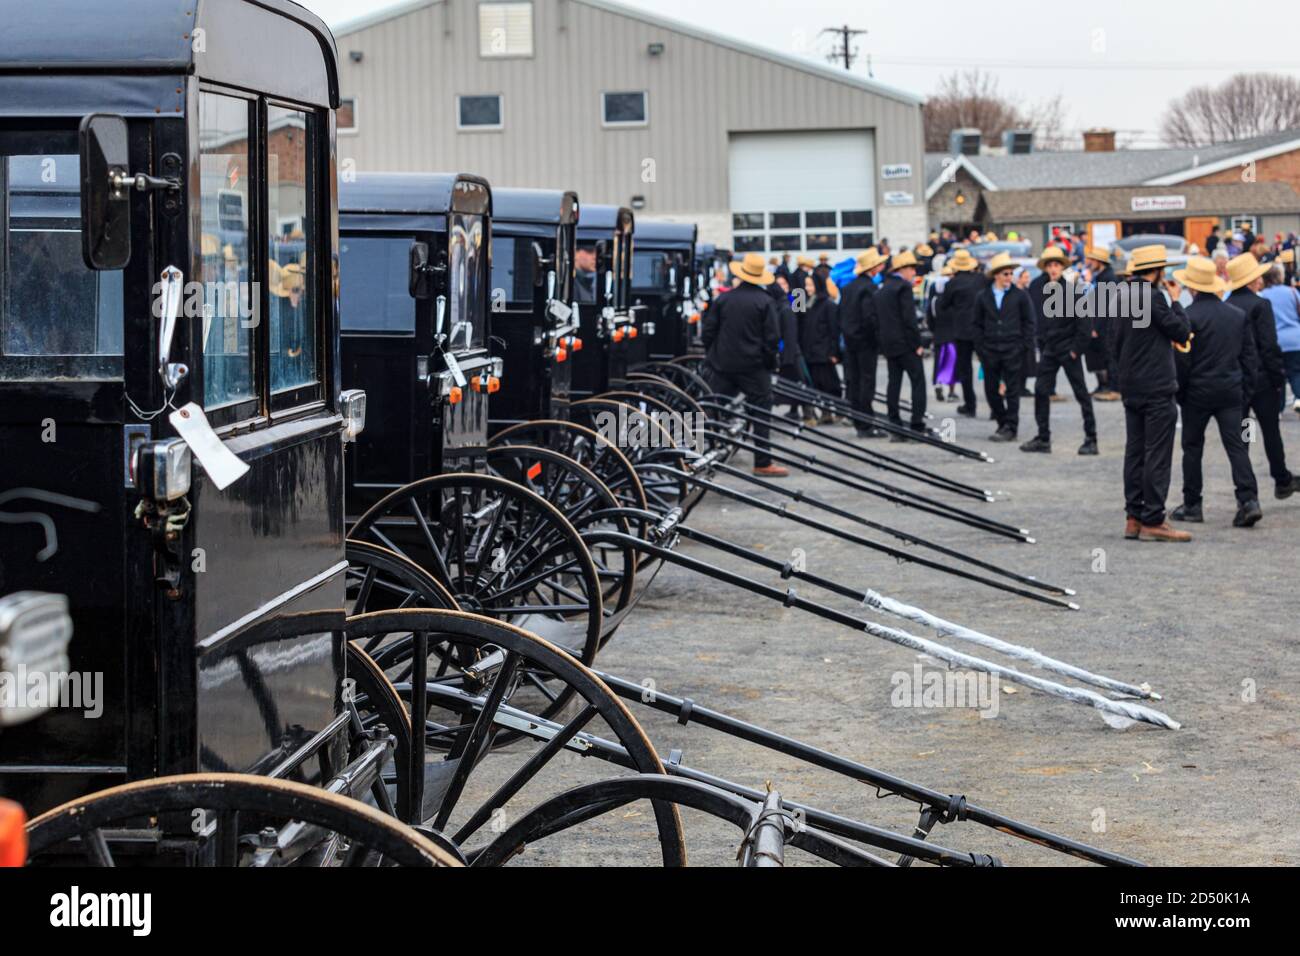 Bart, PA, USA - March 5, 2011: Amish buggies soon to be sold at the annual mud sale at the Bart Fire Company in Lancaster County, PA. Stock Photo